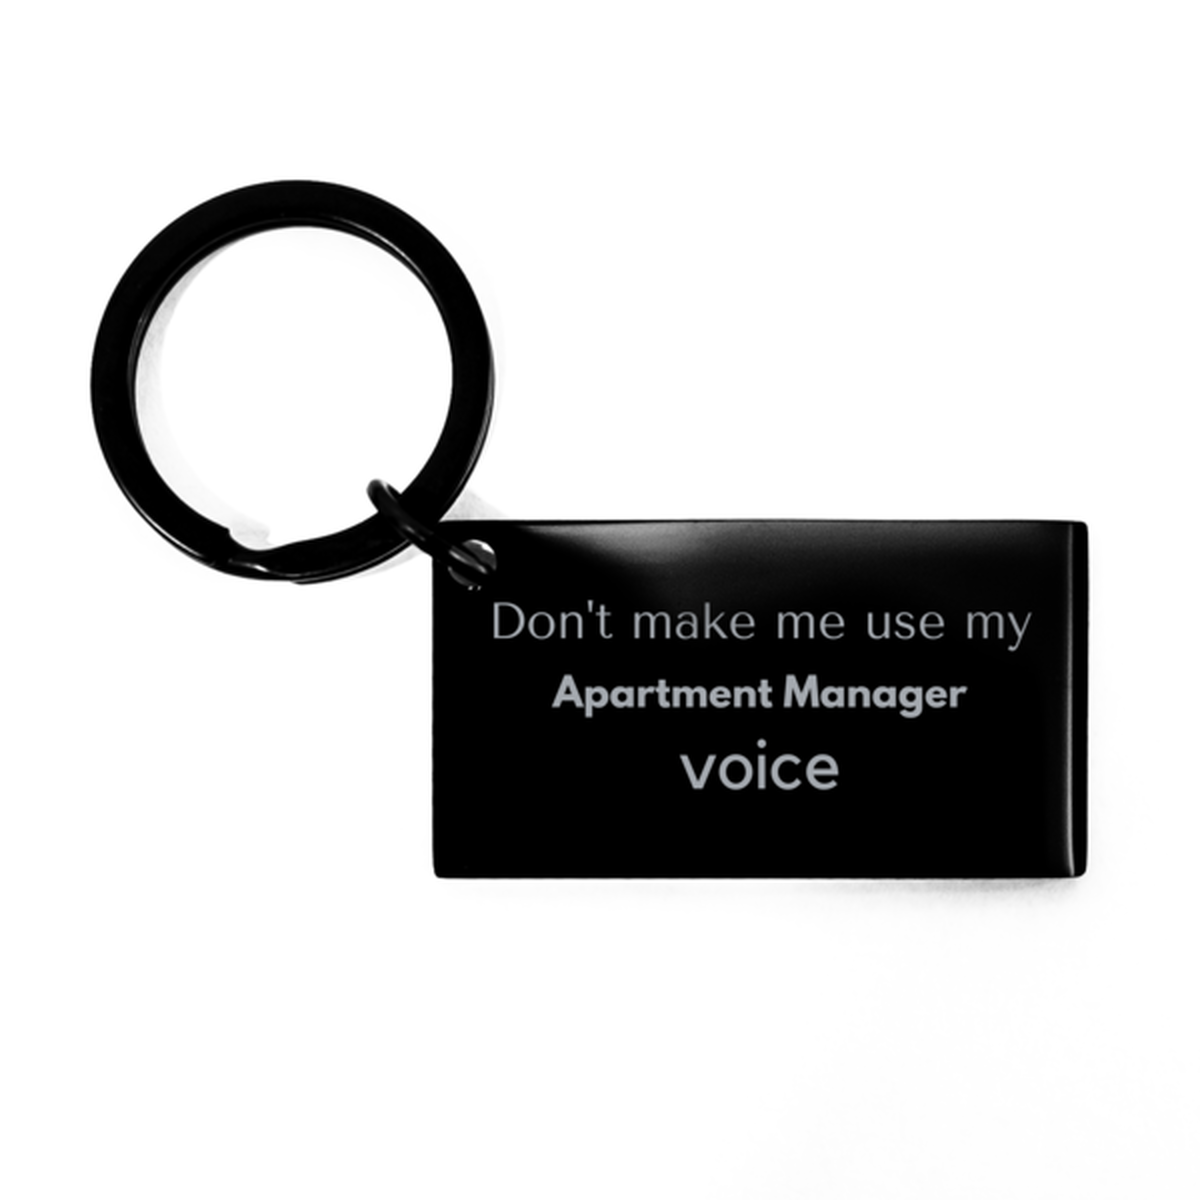 Don't make me use my Apartment Manager voice, Sarcasm Apartment Manager Gifts, Christmas Apartment Manager Keychain Birthday Unique Gifts For Apartment Manager Coworkers, Men, Women, Colleague, Friends